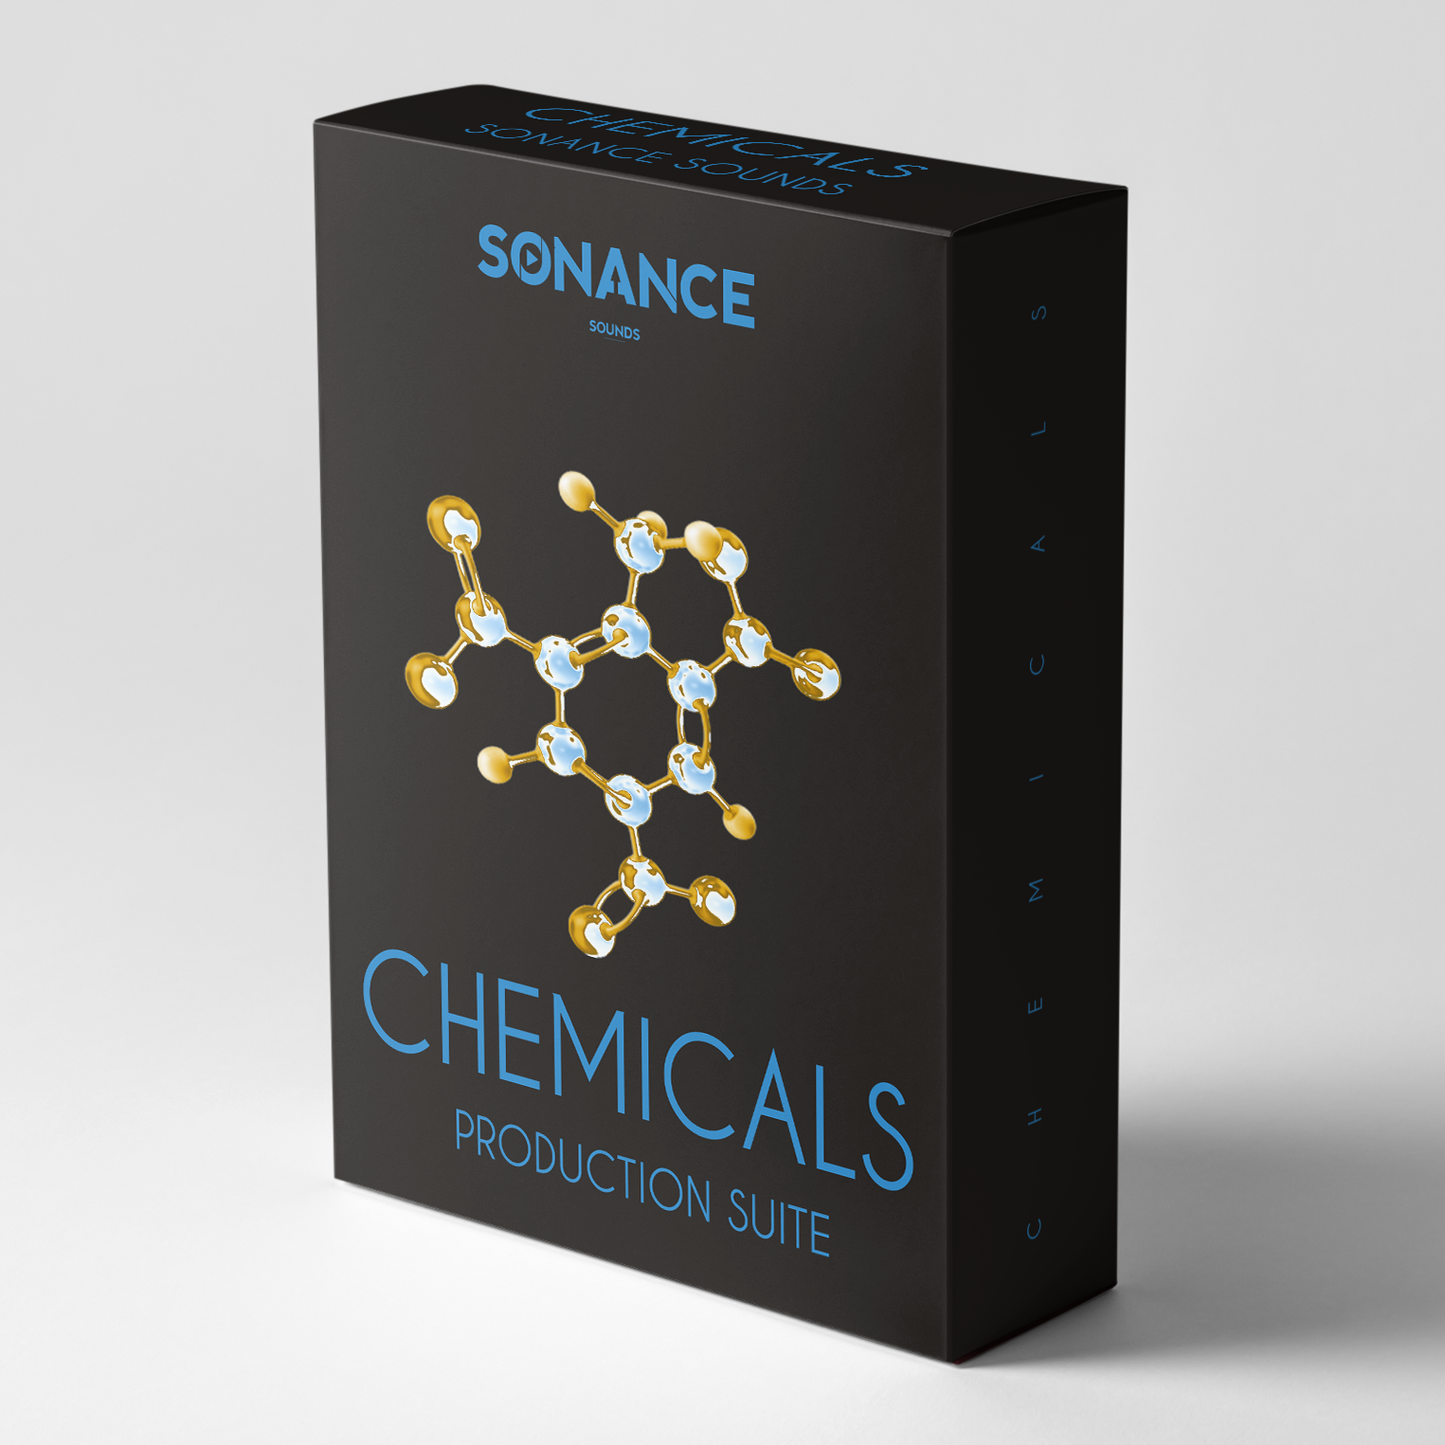 Sonance Sounds - Chemicals